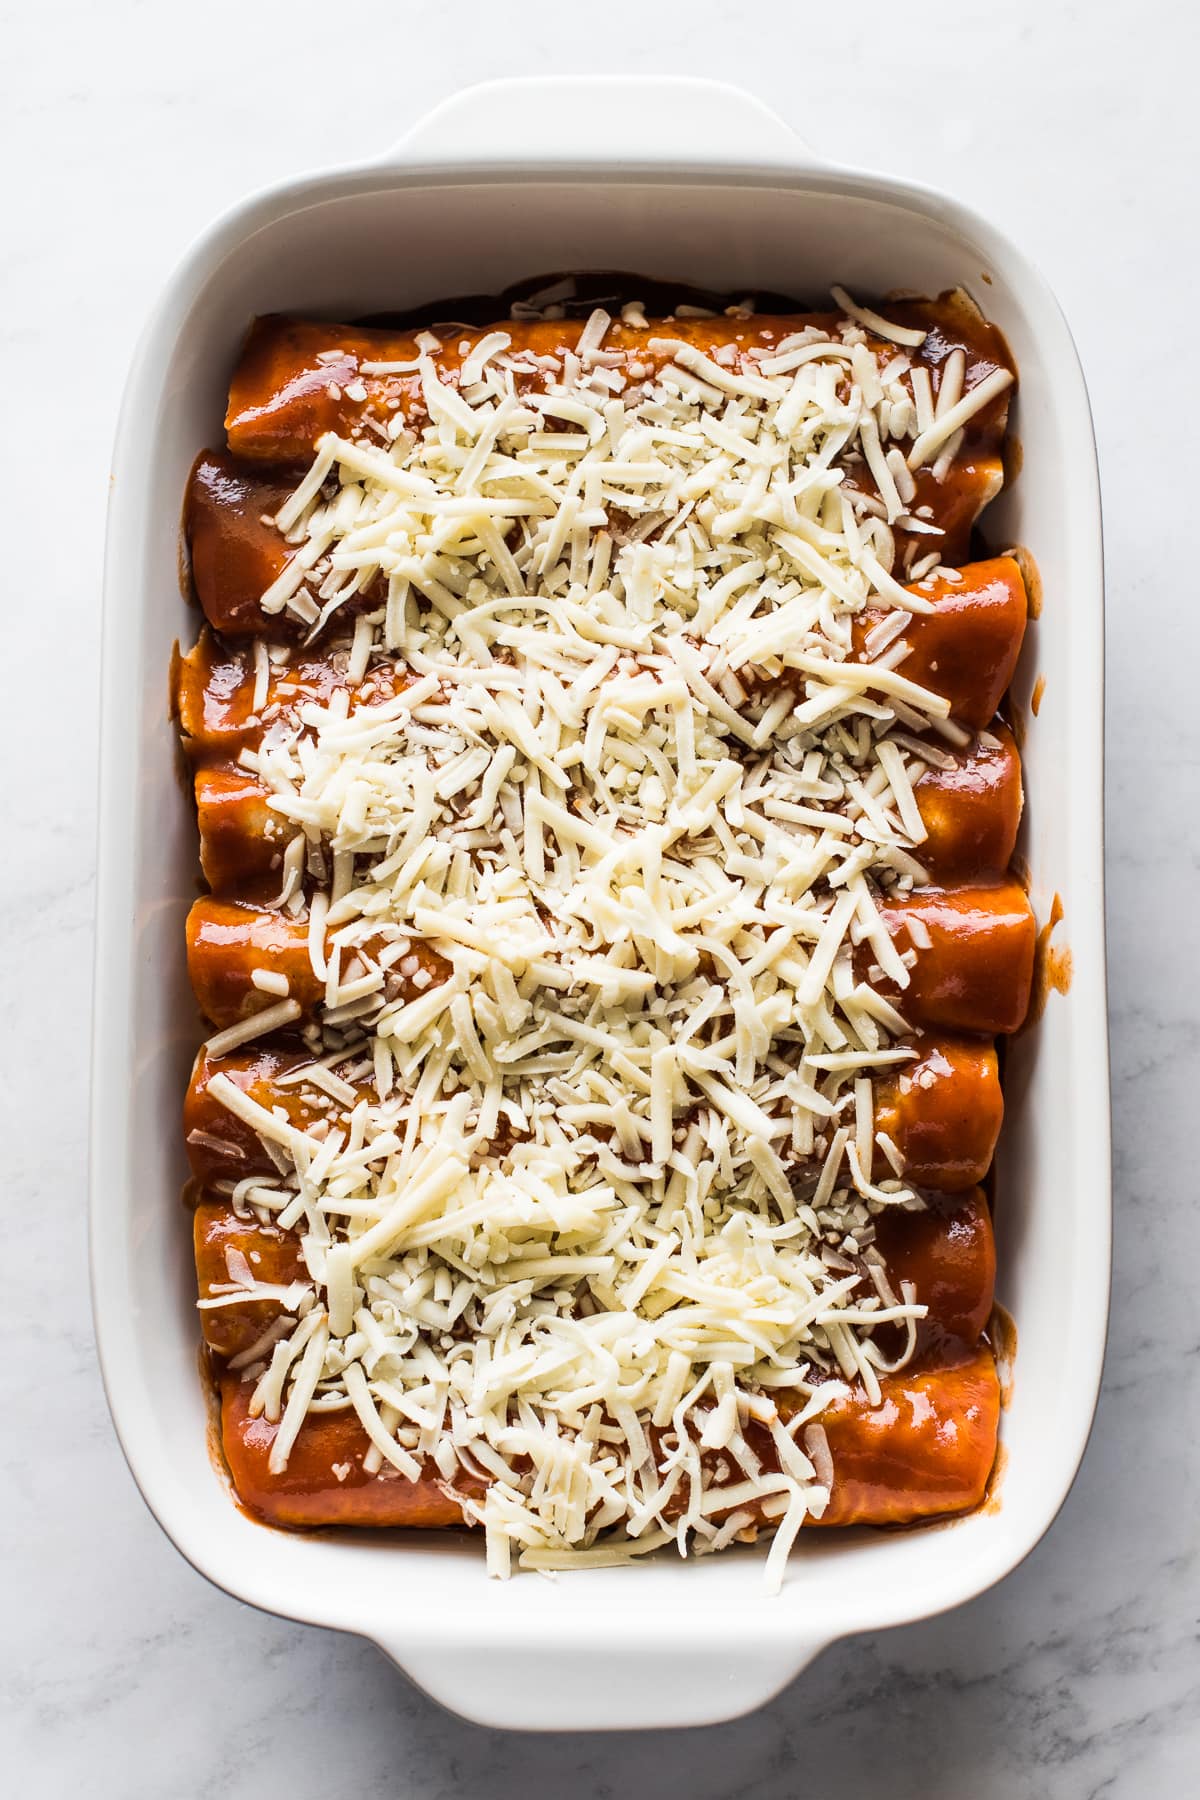 Turkey enchiladas in a baking dish topped with shredded cheese.